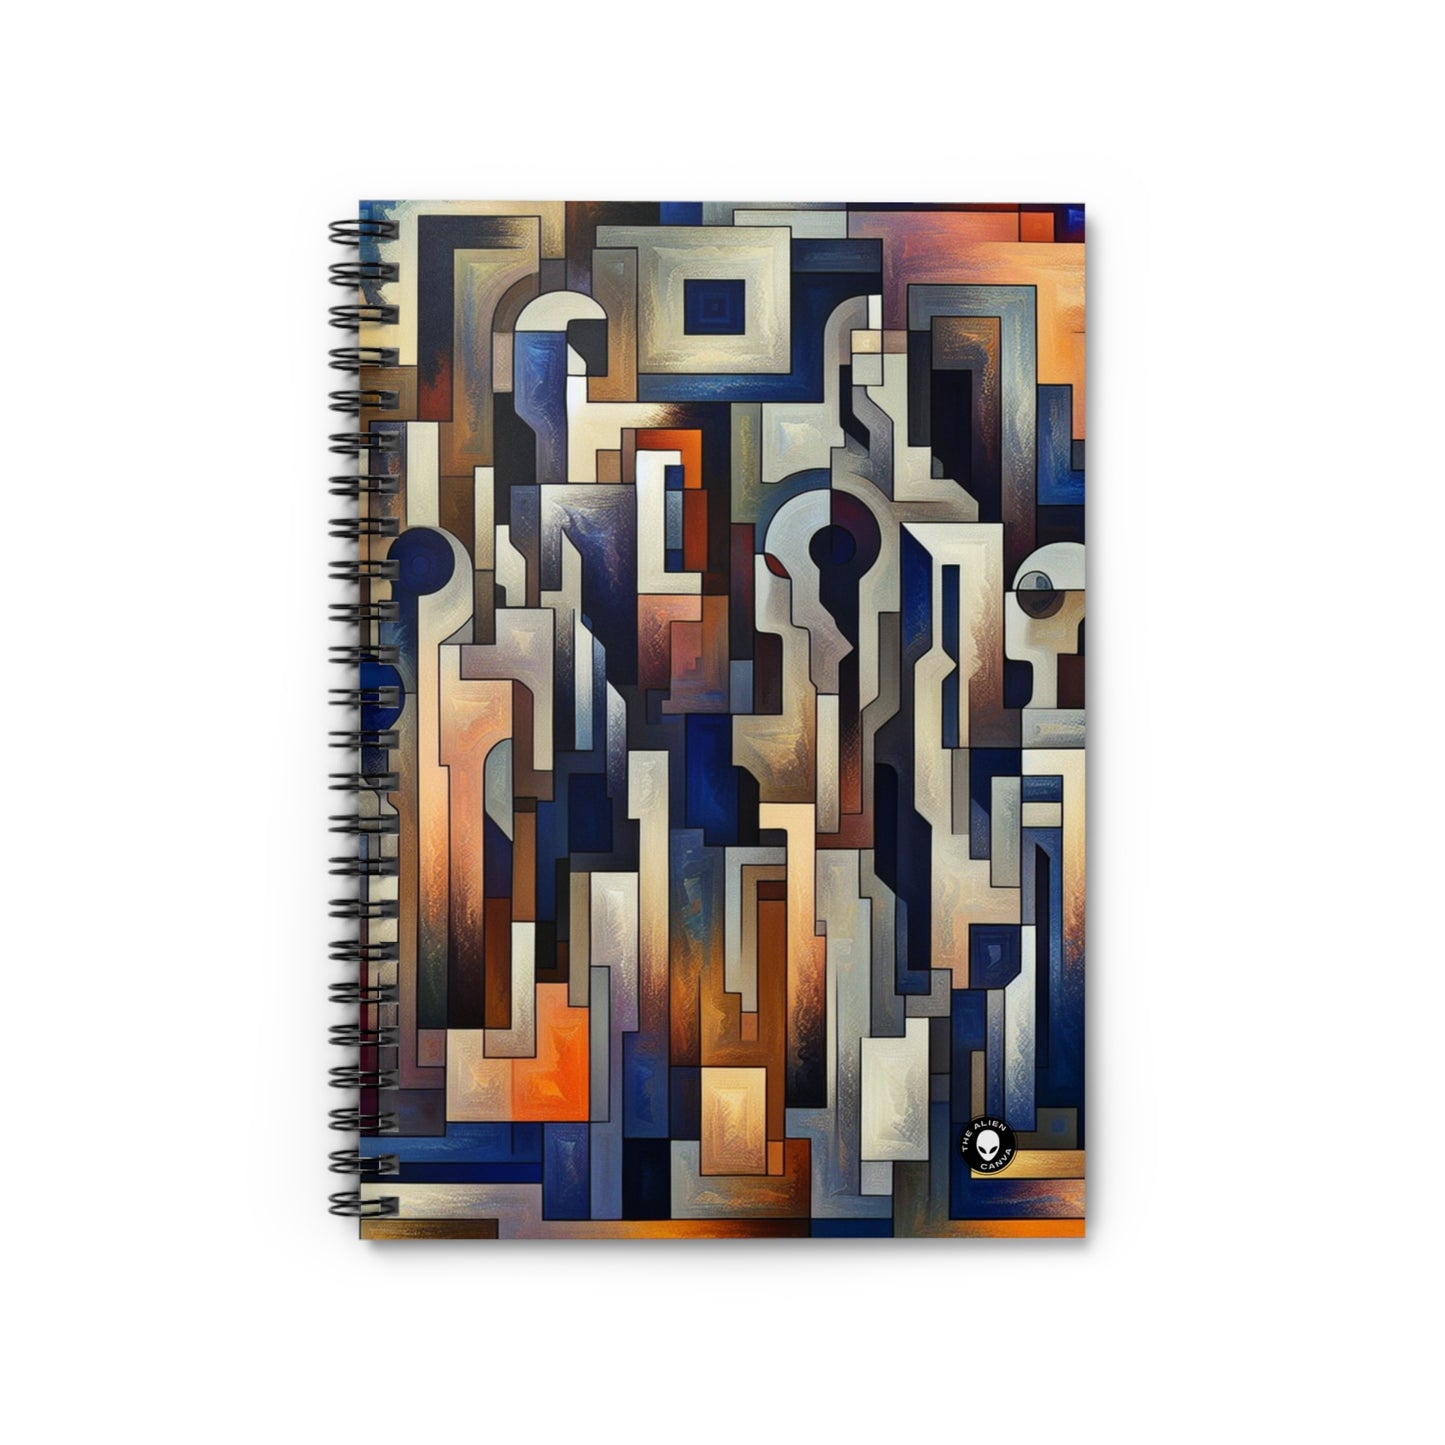 "Enigma Realms: A World of Surreal Beauty" - The Alien Spiral Notebook (Ruled Line) Metaphysical Art